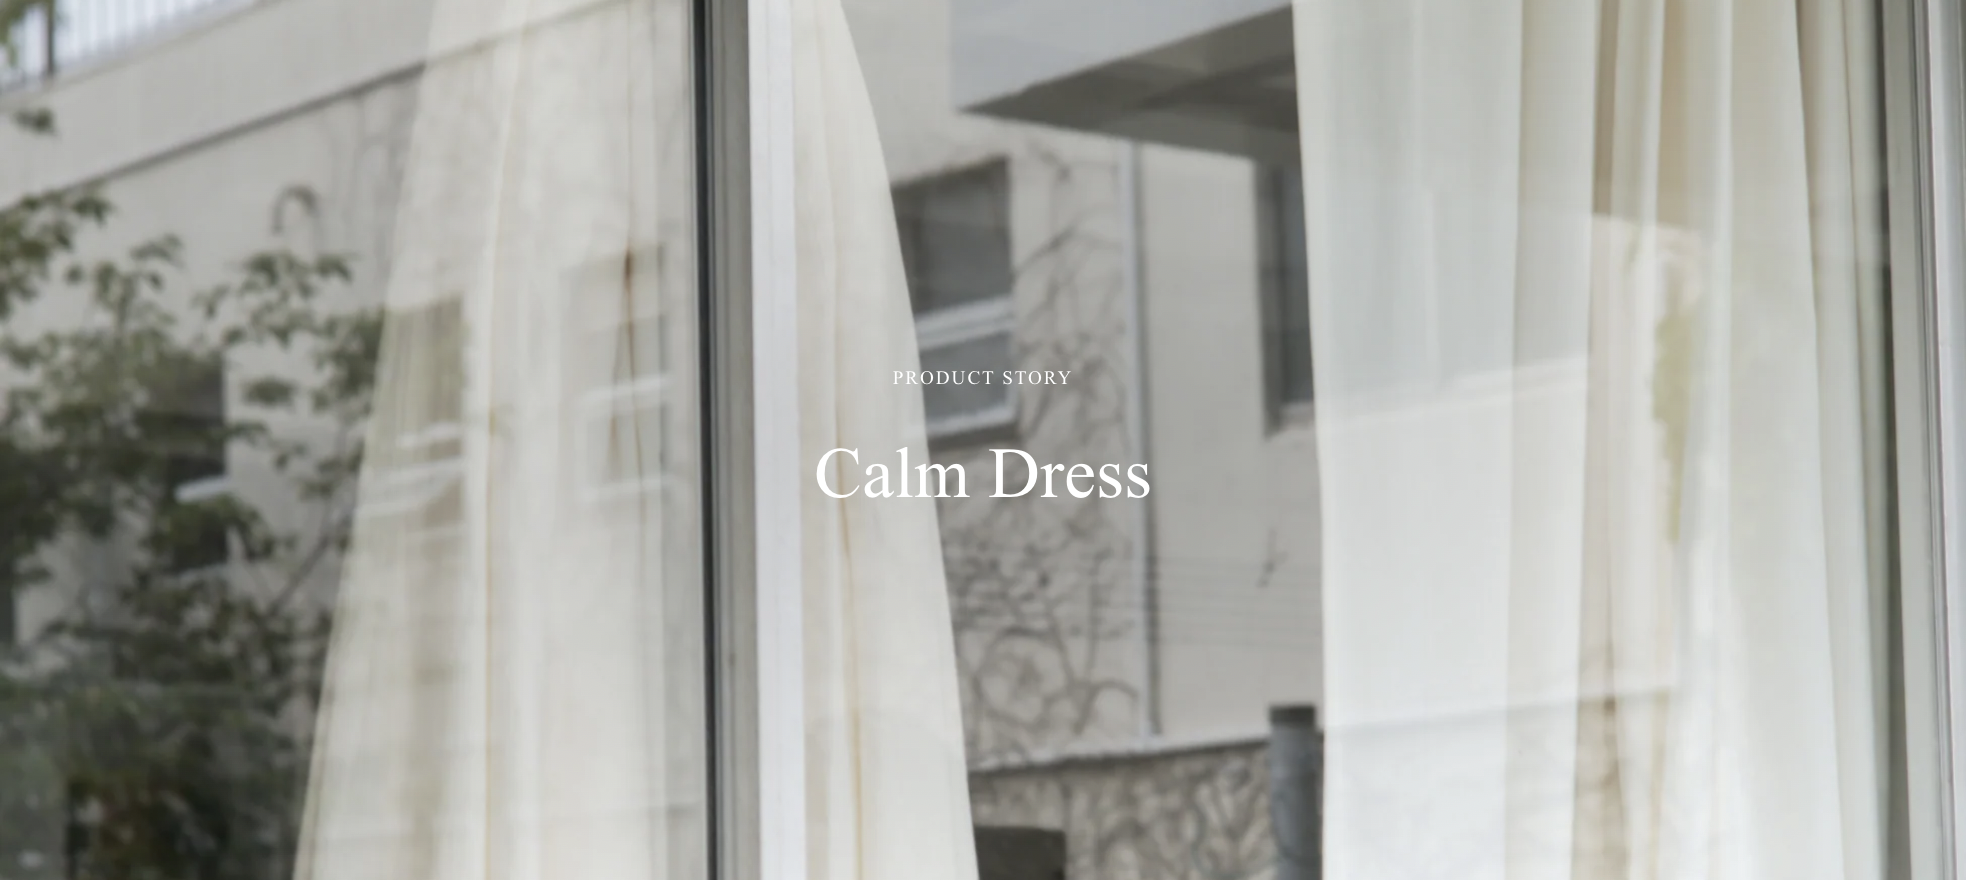 PRODUCT STORY / Calm Dress Ⅱ